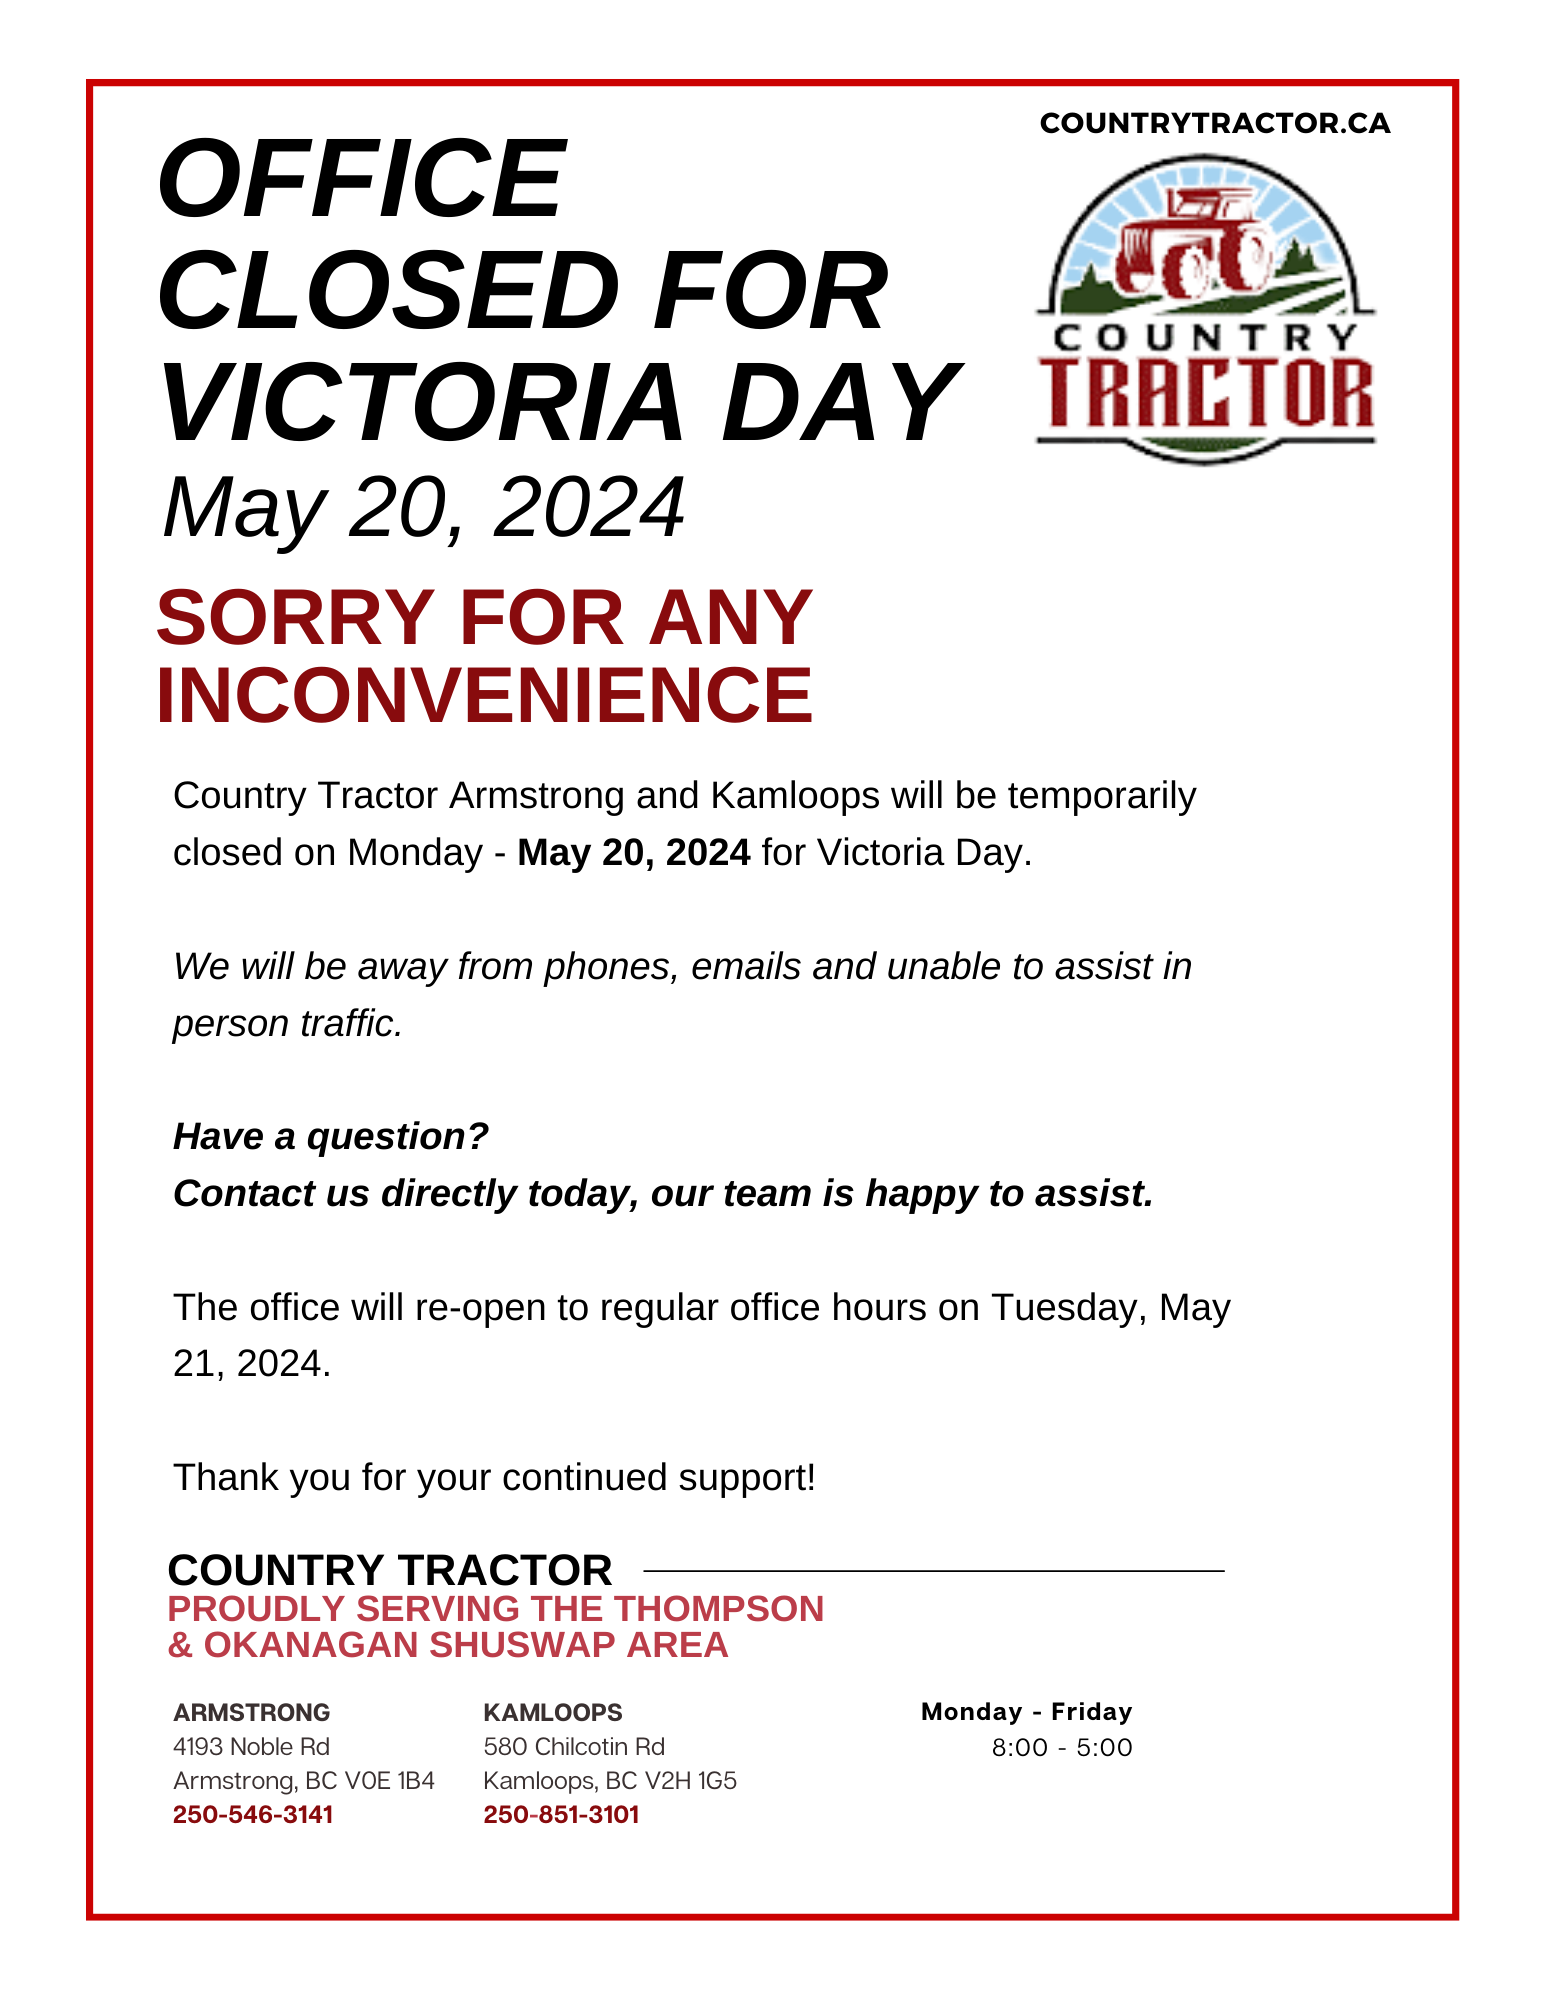 Office closed on May 20th, 2024